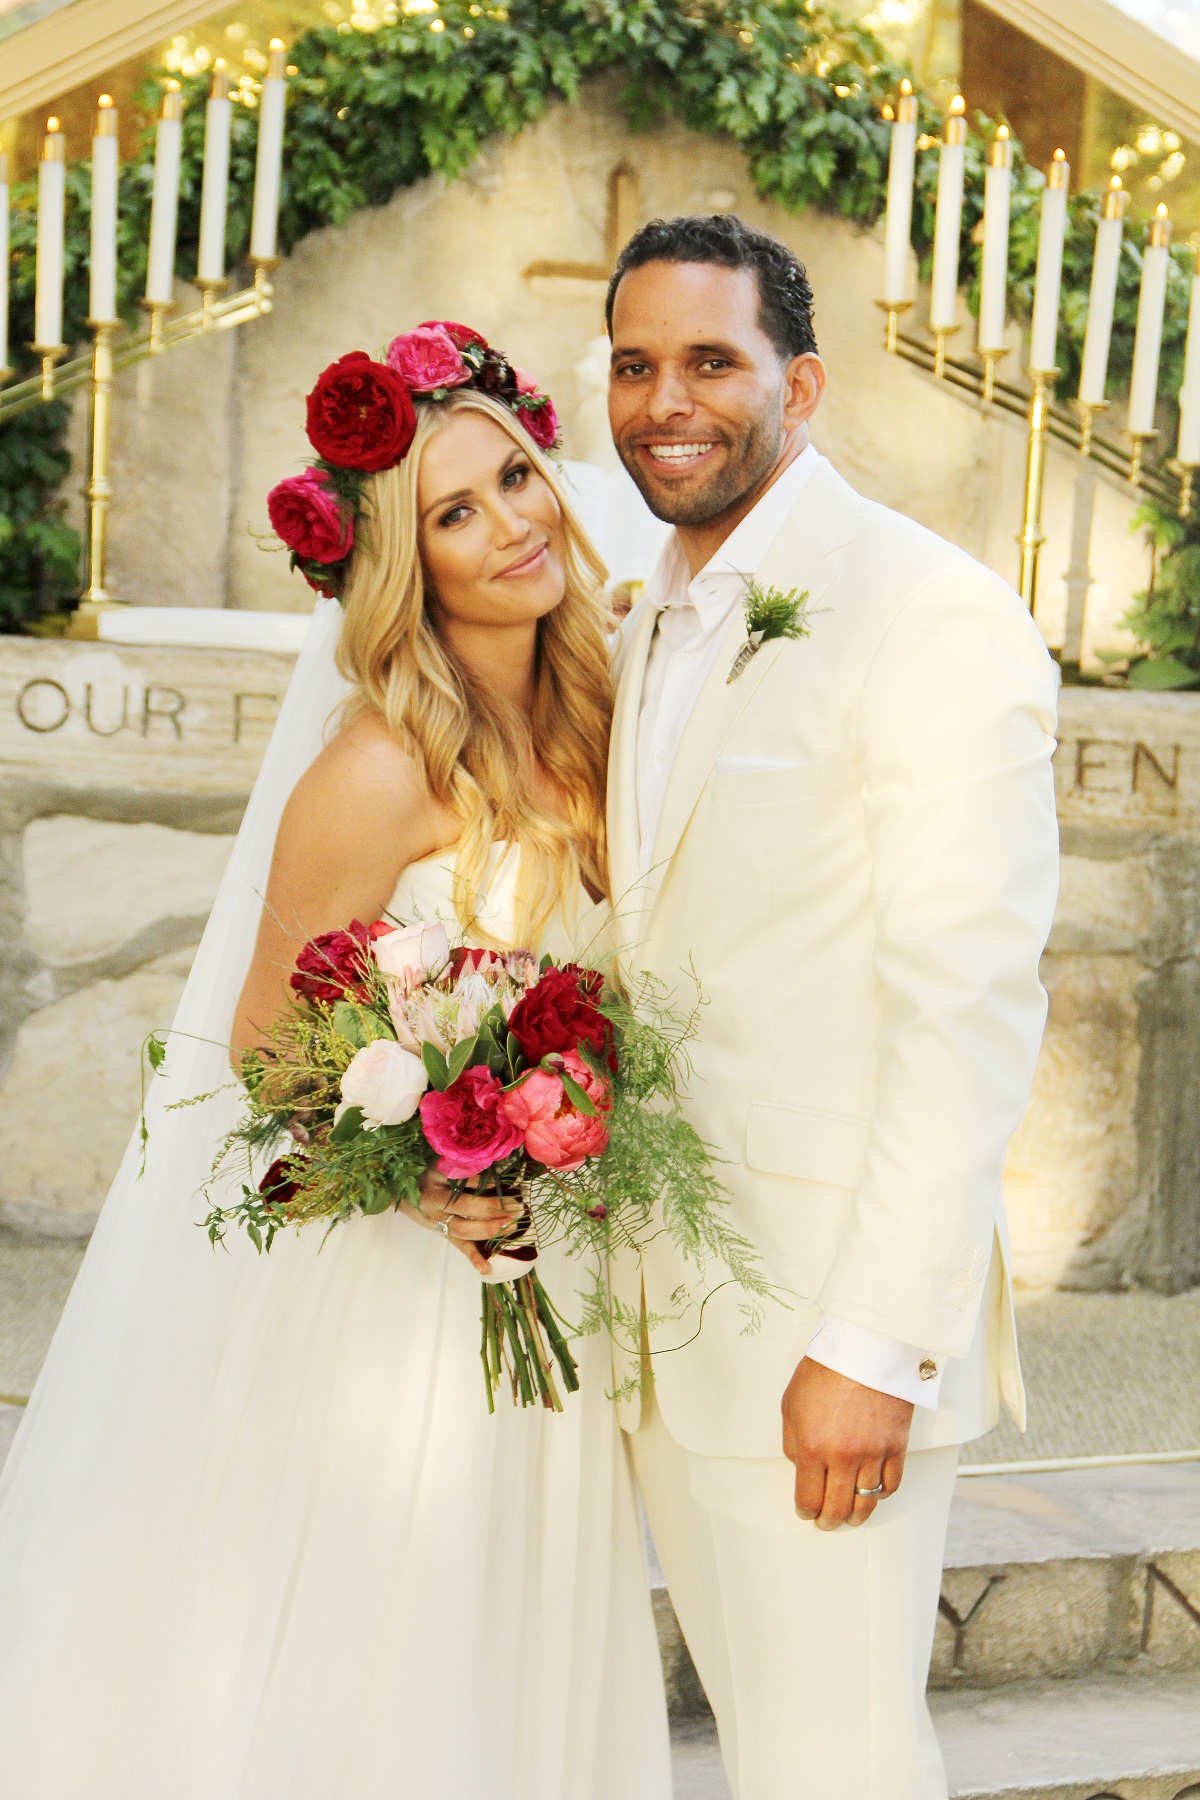 Willa Ford and Ryan Nece got married on October 8, 2015